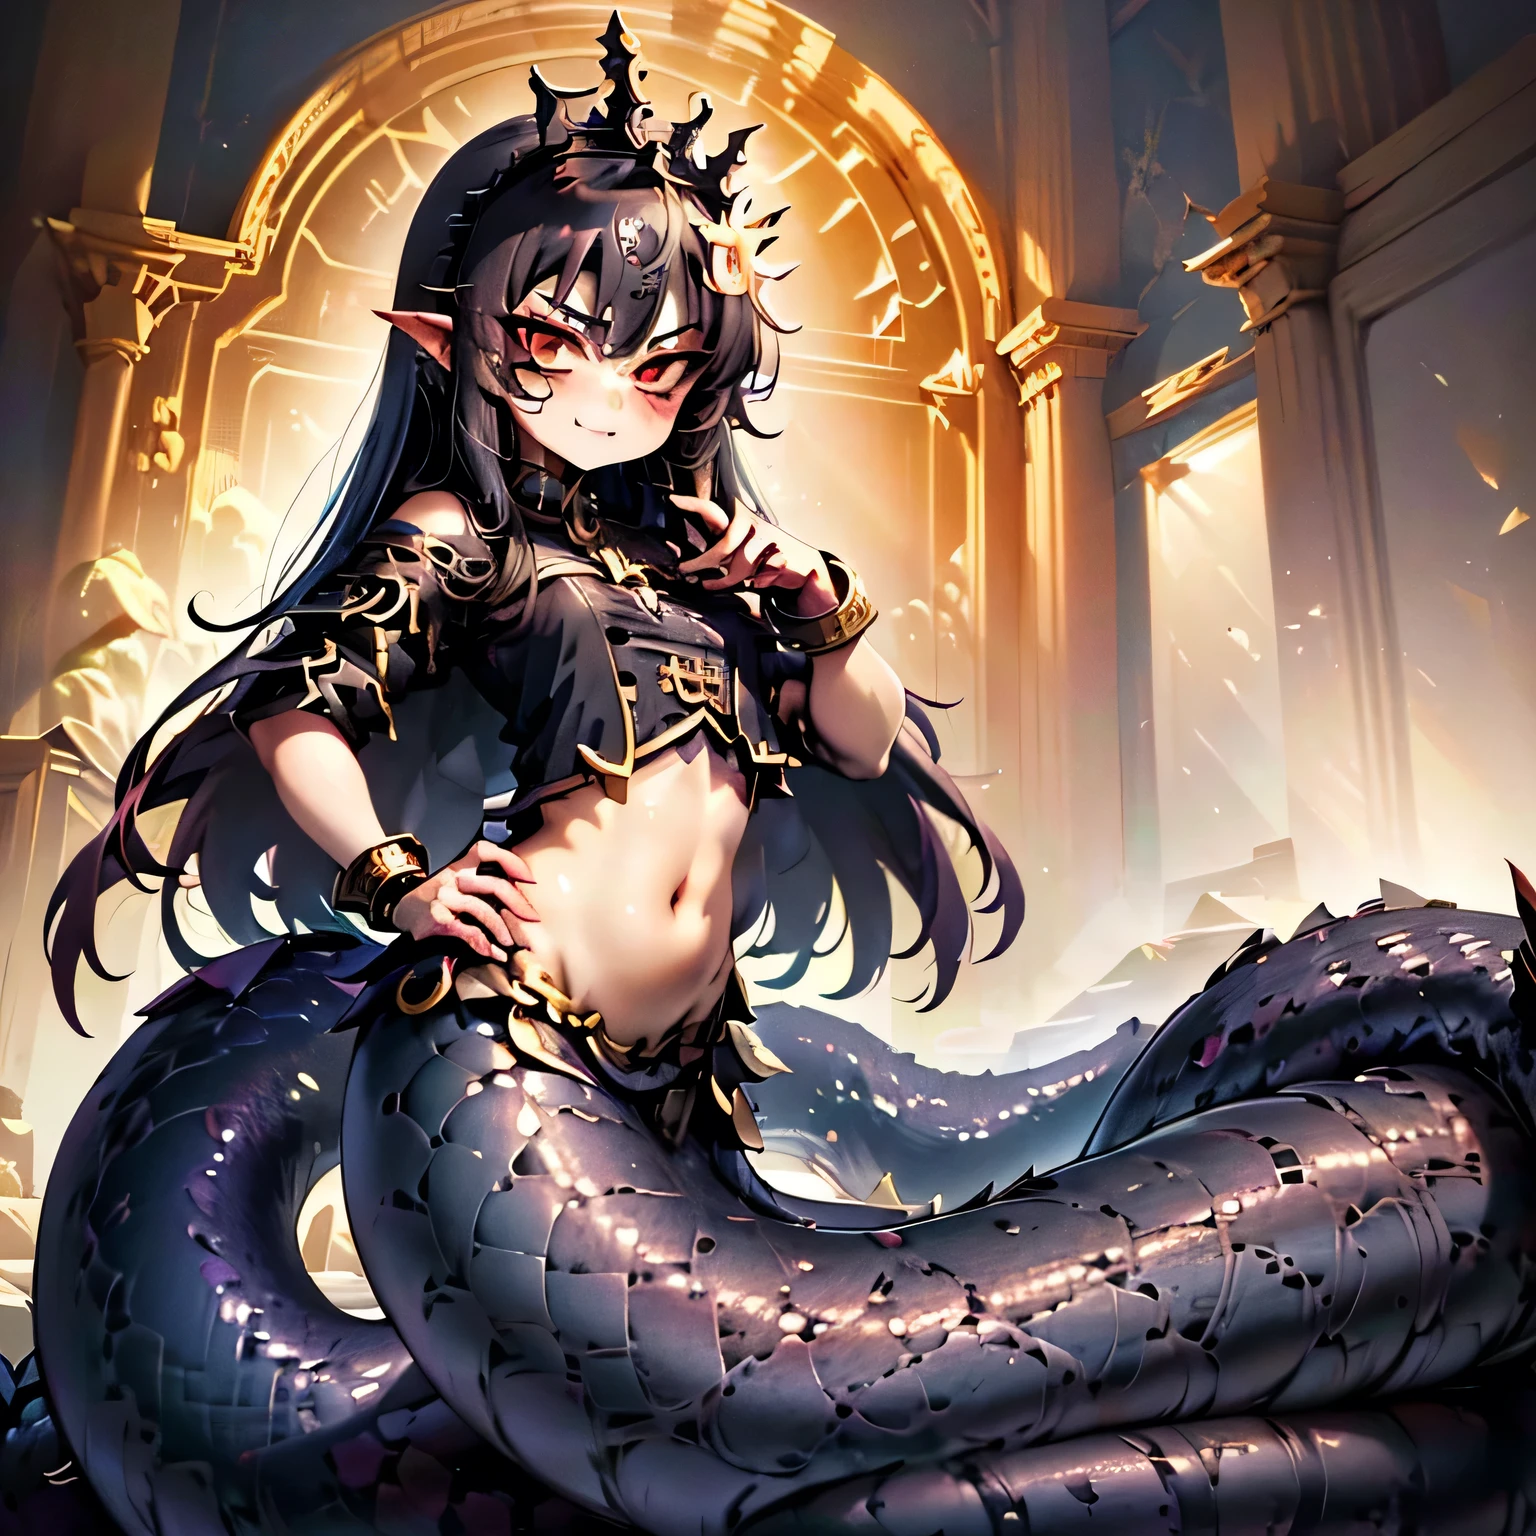 (Superflat, Flat Shading),Lamia Queen\(cute,kawaii,small kid,Geeky feel,Black Scales,Arrogant and sharp gaze,Intimidating posture,Blue pattern on the scales,long fluffy black hair,Gold Chain Mail,bracelet,Taking an arrogant stance on the royal throne,evil smile,Barbaric style,very cute,dynamic pose,\), BREAK ,background\(in the glorious palace,dark\),Dark fantasy,dynamic wide view,full body,High angle,quality\(8k,wallpaper of extremely detailed CG unit, ​masterpiece,hight resolution,top-quality,top-quality real texture skin,hyper realisitic,increase the resolution,RAW photos,best qualtiy,highly detailed,the wallpaper,cinematic lighting,ray trace,golden ratio,\),dynamic angle,anatomically correct hand,better hands,5fingers,[nsfw:1.5]